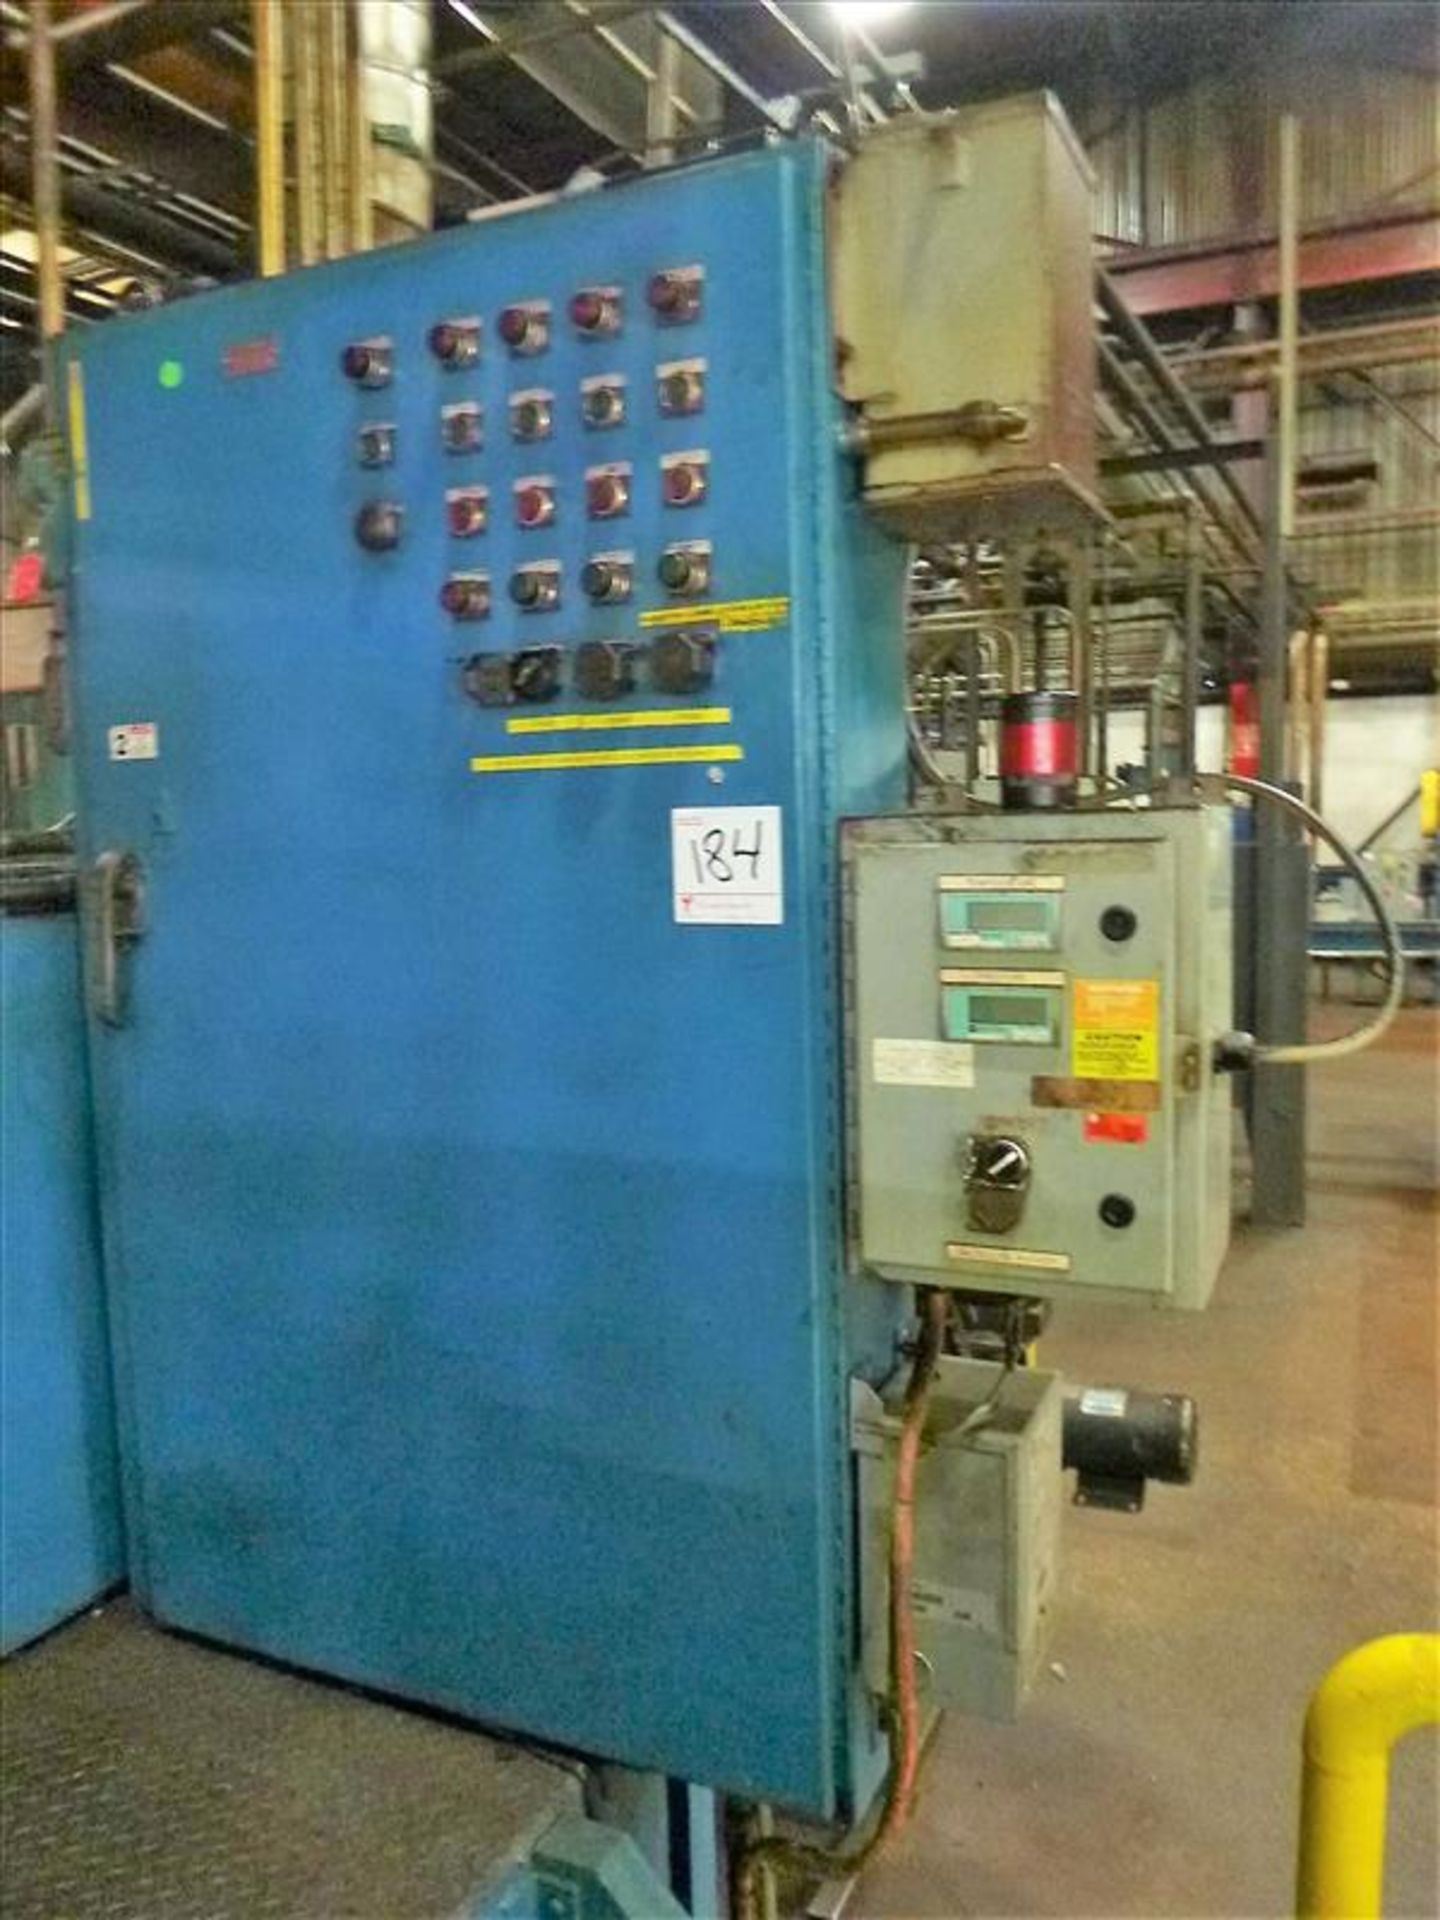 TOCCO Hardener Unit w/ TOCCOTRON 5EA 150 kw RF Generator, s/n 12-8313-16 c/w Distilled Water, - Image 20 of 23